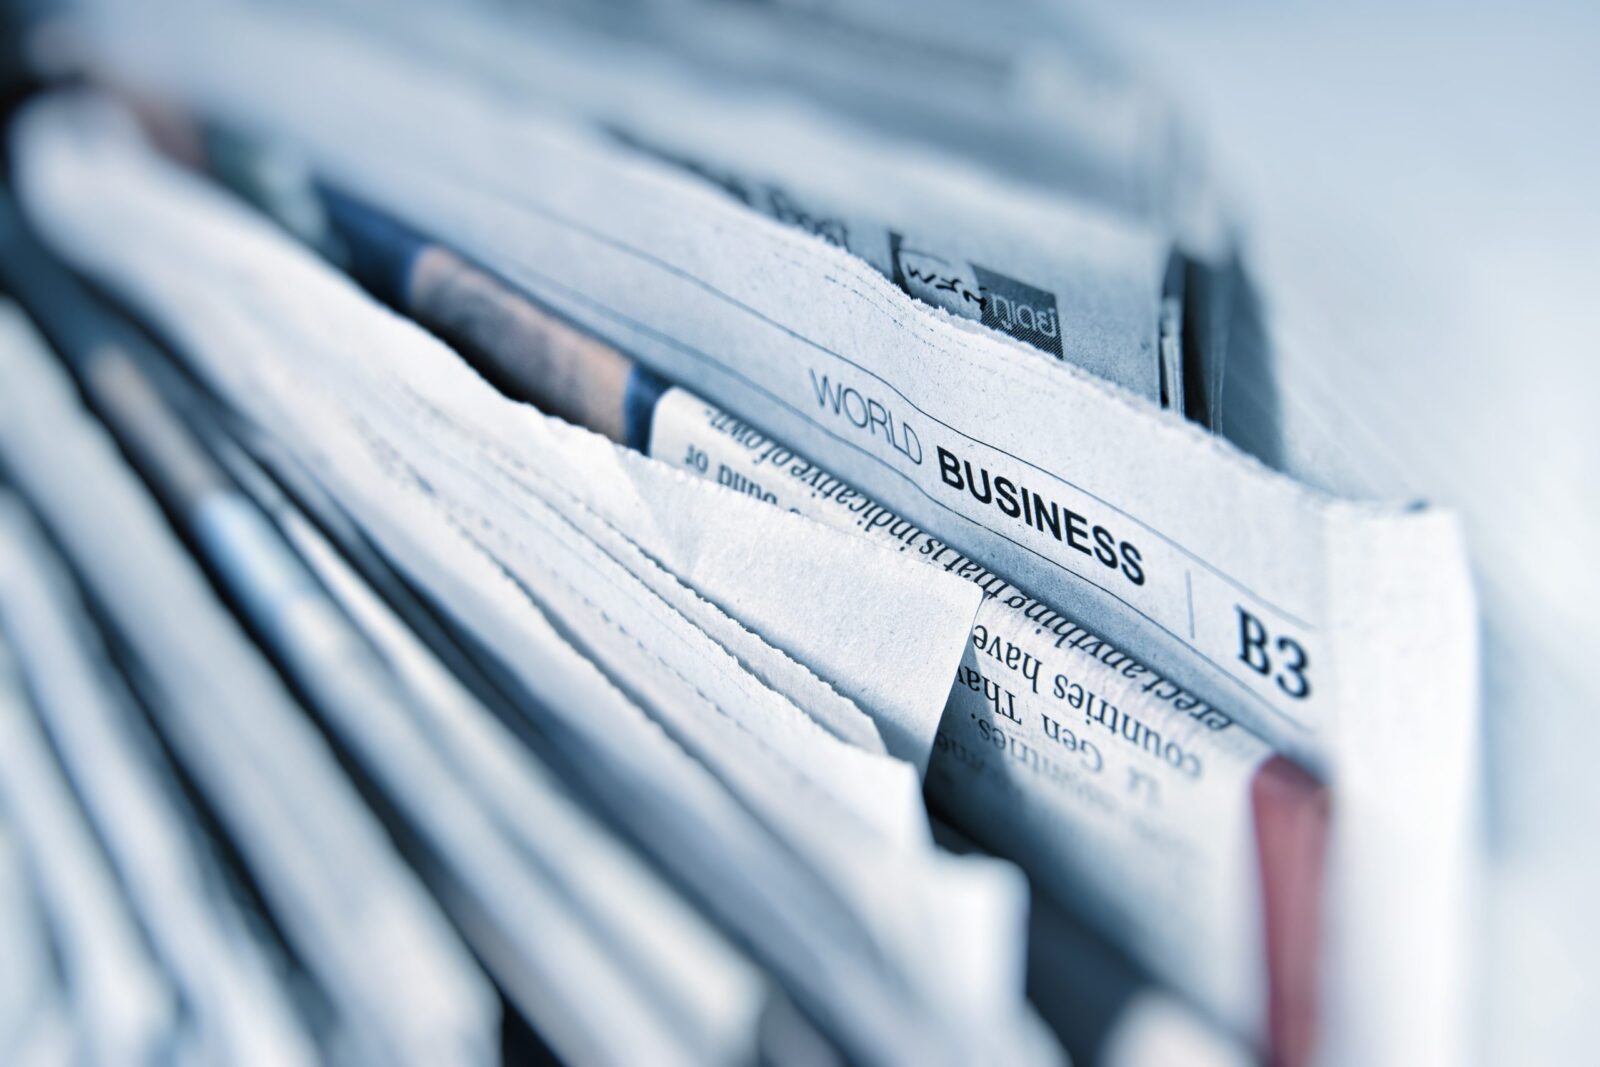 newspaper pile with business page showing